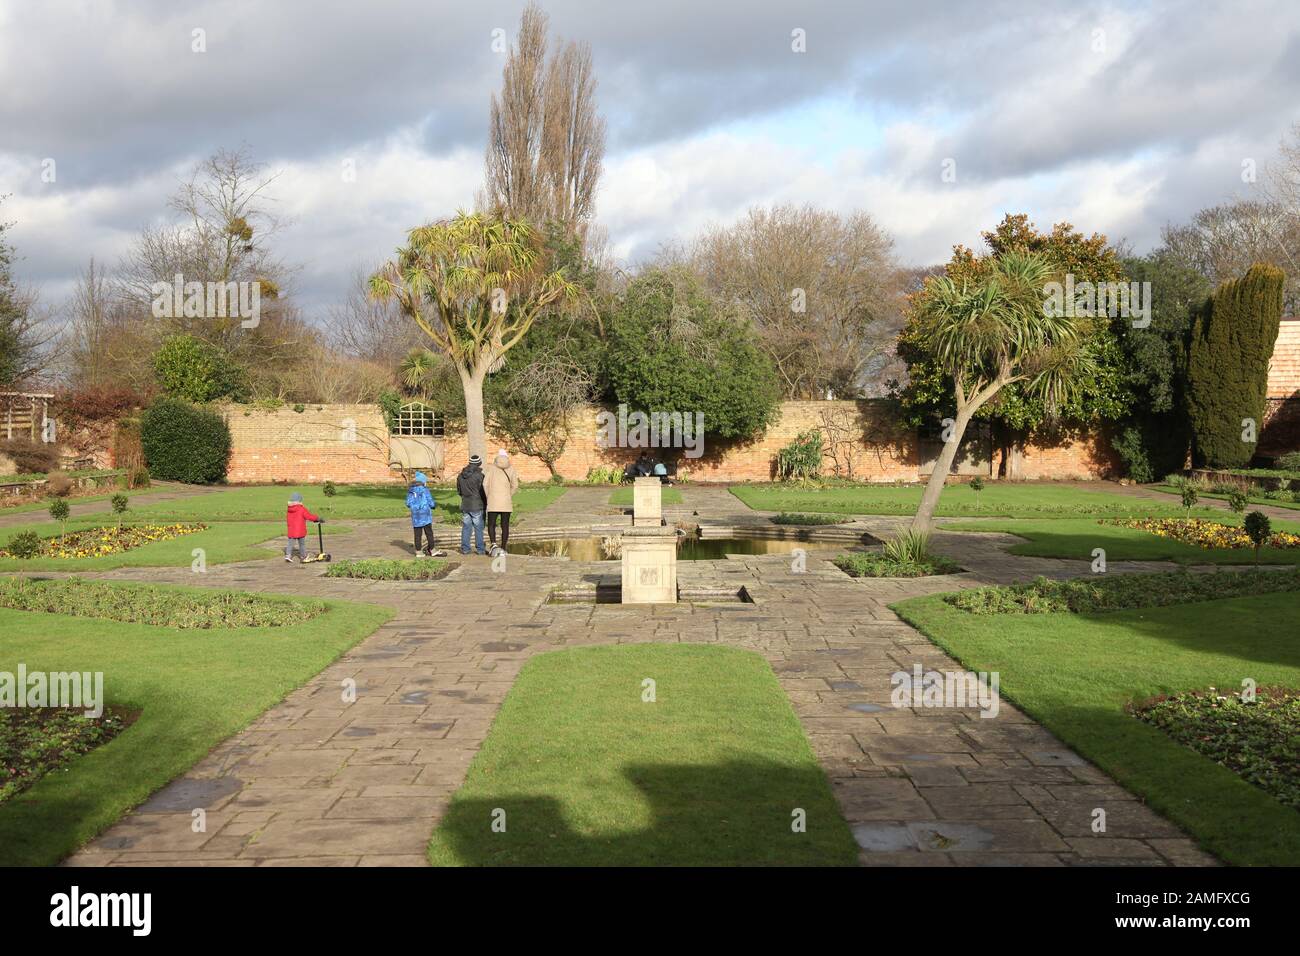 The walled garden at Priory Park in Winter, Prittlewell, Southend on Sea, Essex, UK - January 2020 Stock Photo